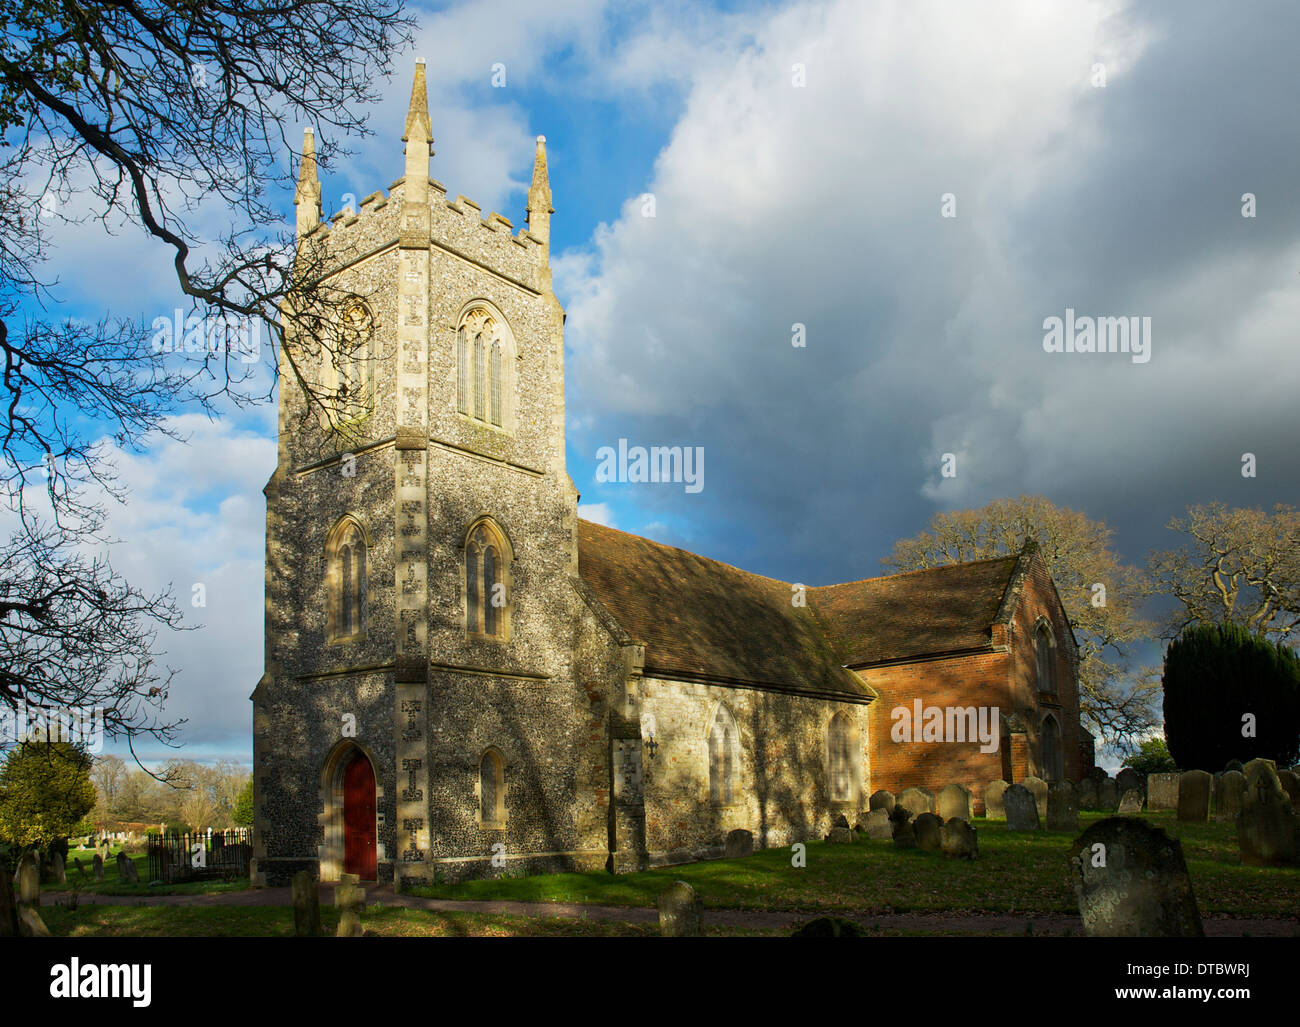 L'église St Mary, Hartley Wintney, Hampshire, England UK Banque D'Images